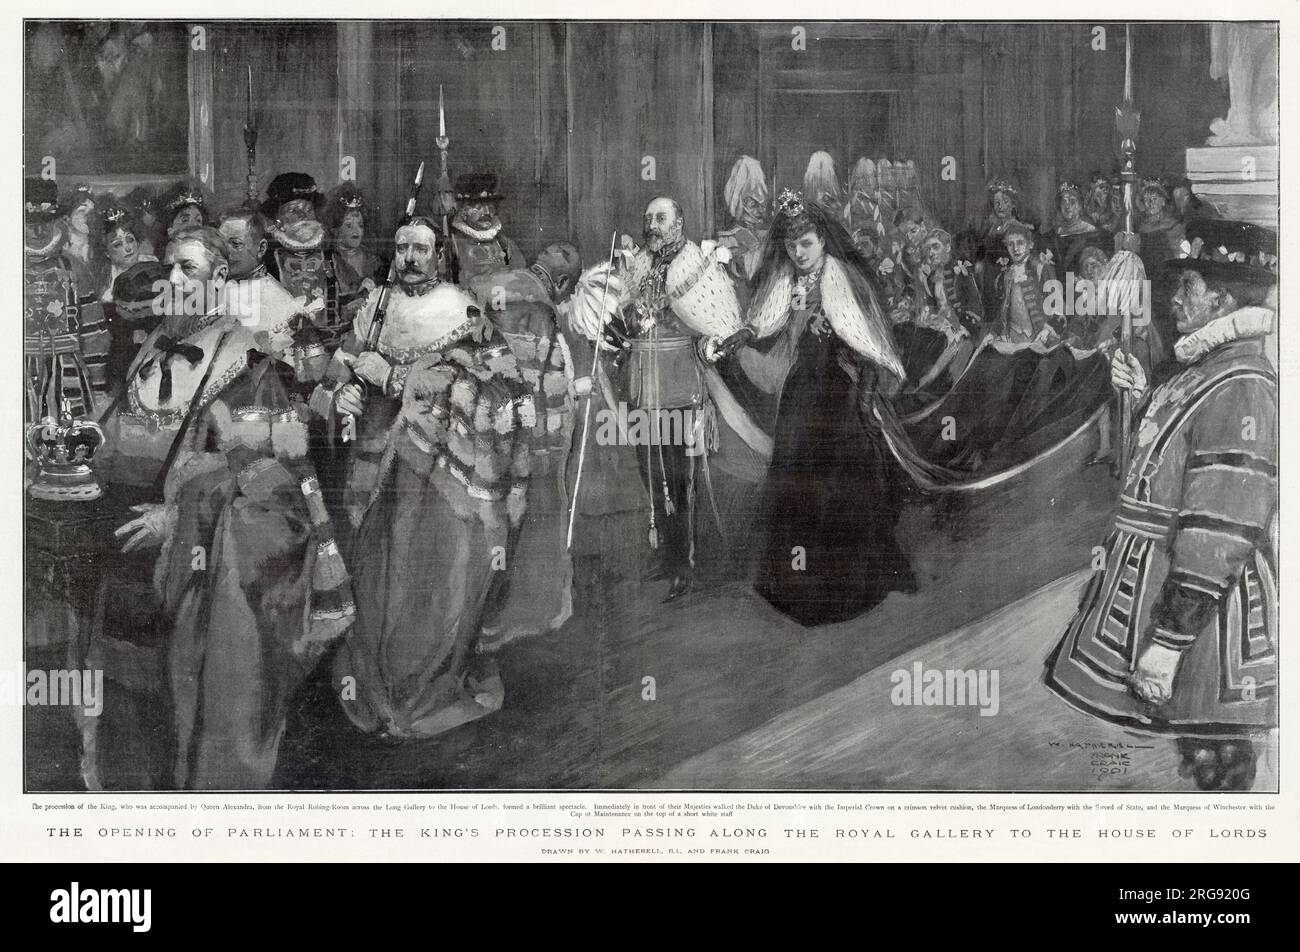 The Opening of Parliament, Edward VII passing along the Royal Gallery to the House of Lords. Stock Photo